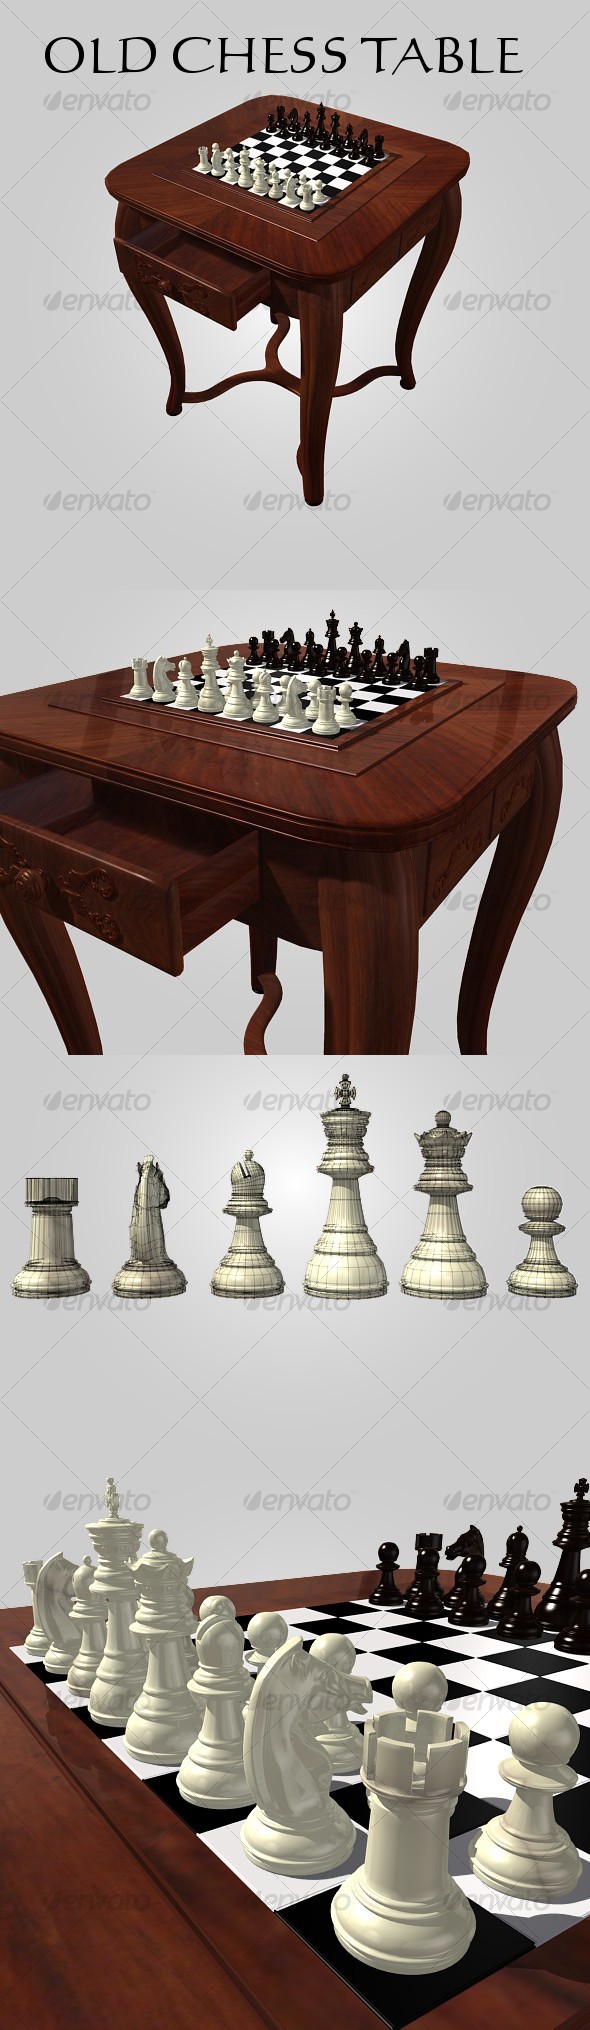 Old Chess Table - 3Docean 117908